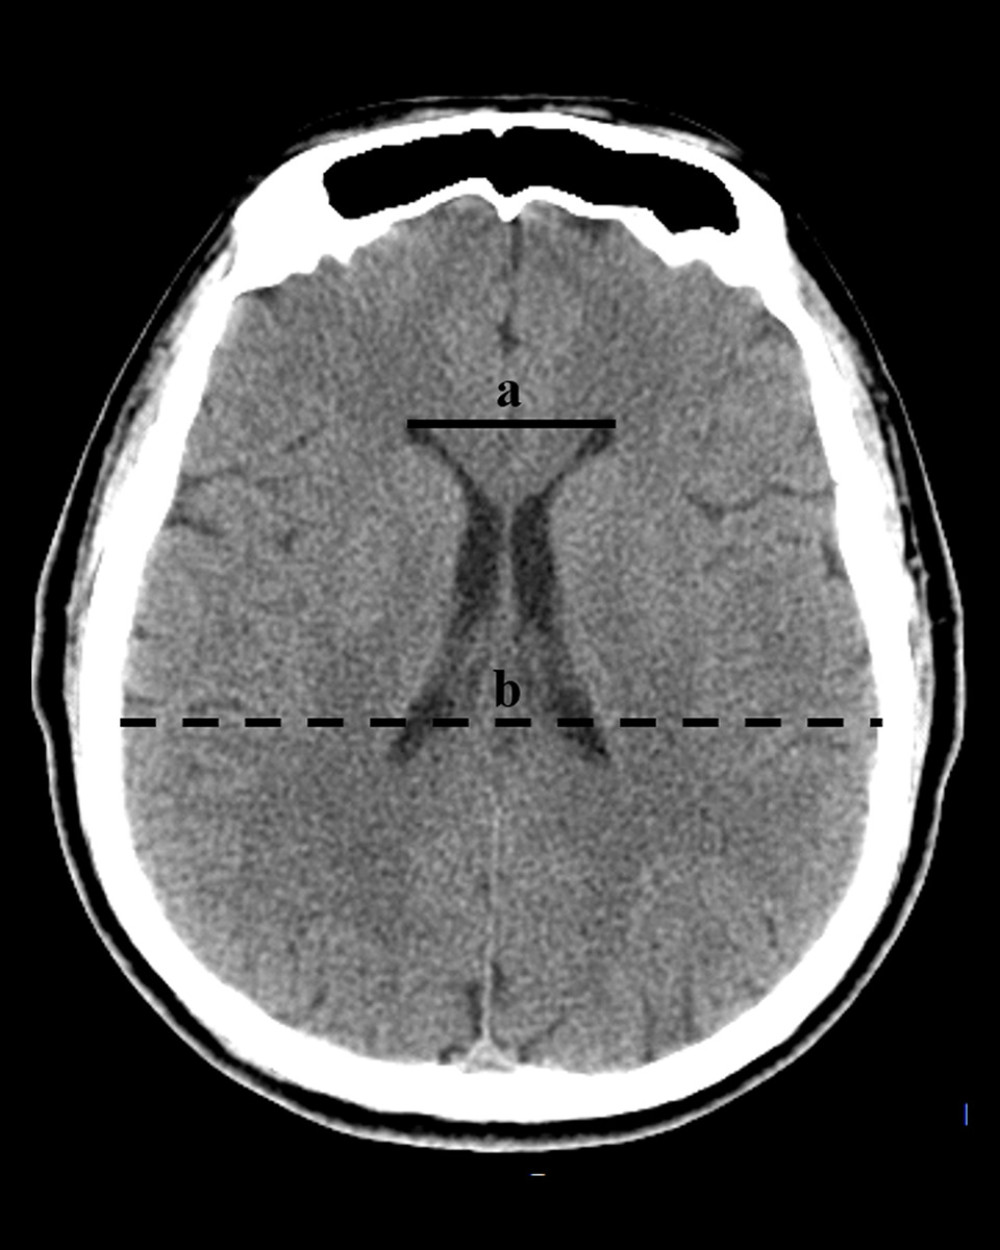 The diagnosis of hydrocephalus was performed by using an Evan index method. The distance between the frontal horns of the lateral ventricles (full line indicated with ‘a’) and the longest inner diameter of skull at the same plane (dotted line indicated with ‘b’). The Evans index was calculated as the ratio of a to b. (Adobe Photoshop CC, 14.0, Adobe).